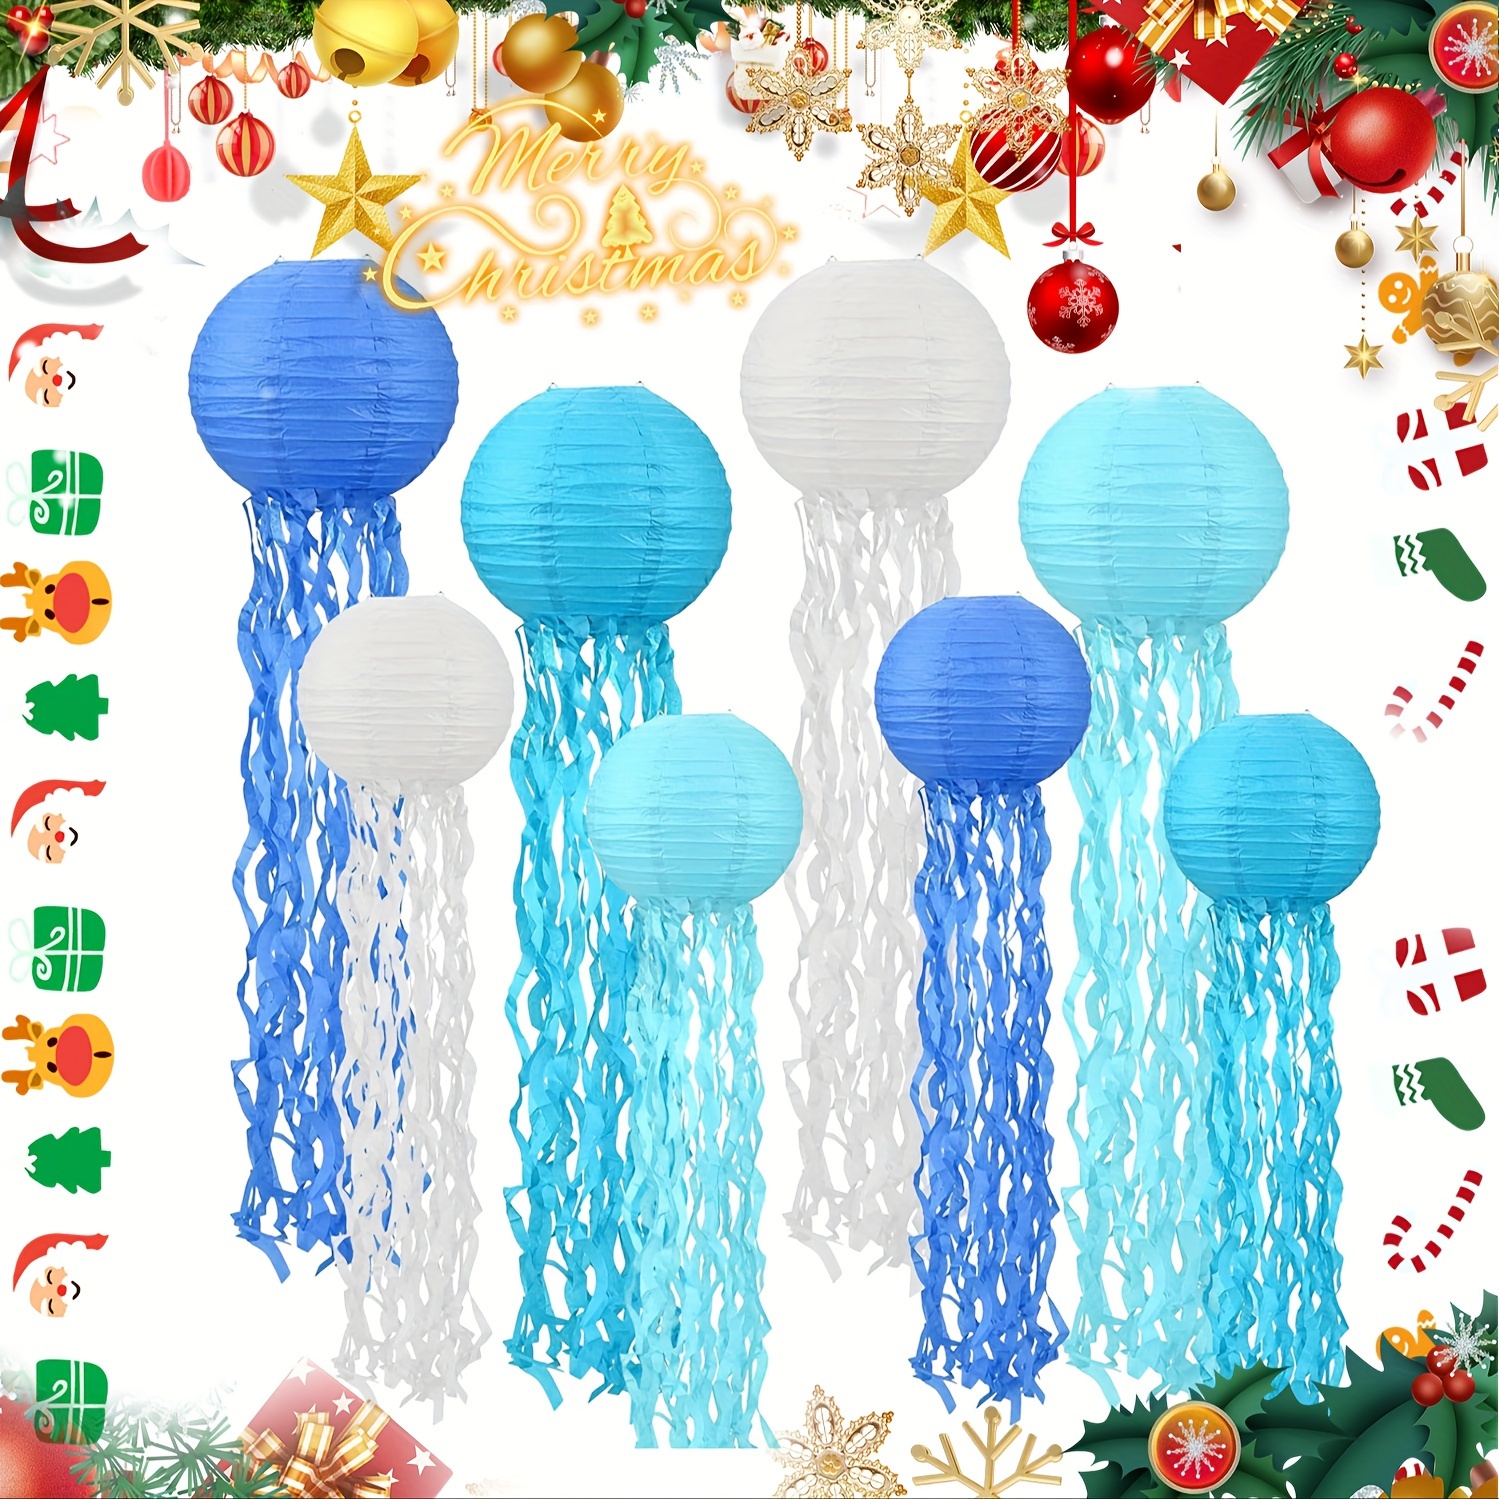 4 Pcs Jelly Fish Light Lamp,Hanging Ceiling Decor for Kids Room, Jelly Fish  Party Underwater Decorations,Gift for Birthday Valentine's Day Christmas